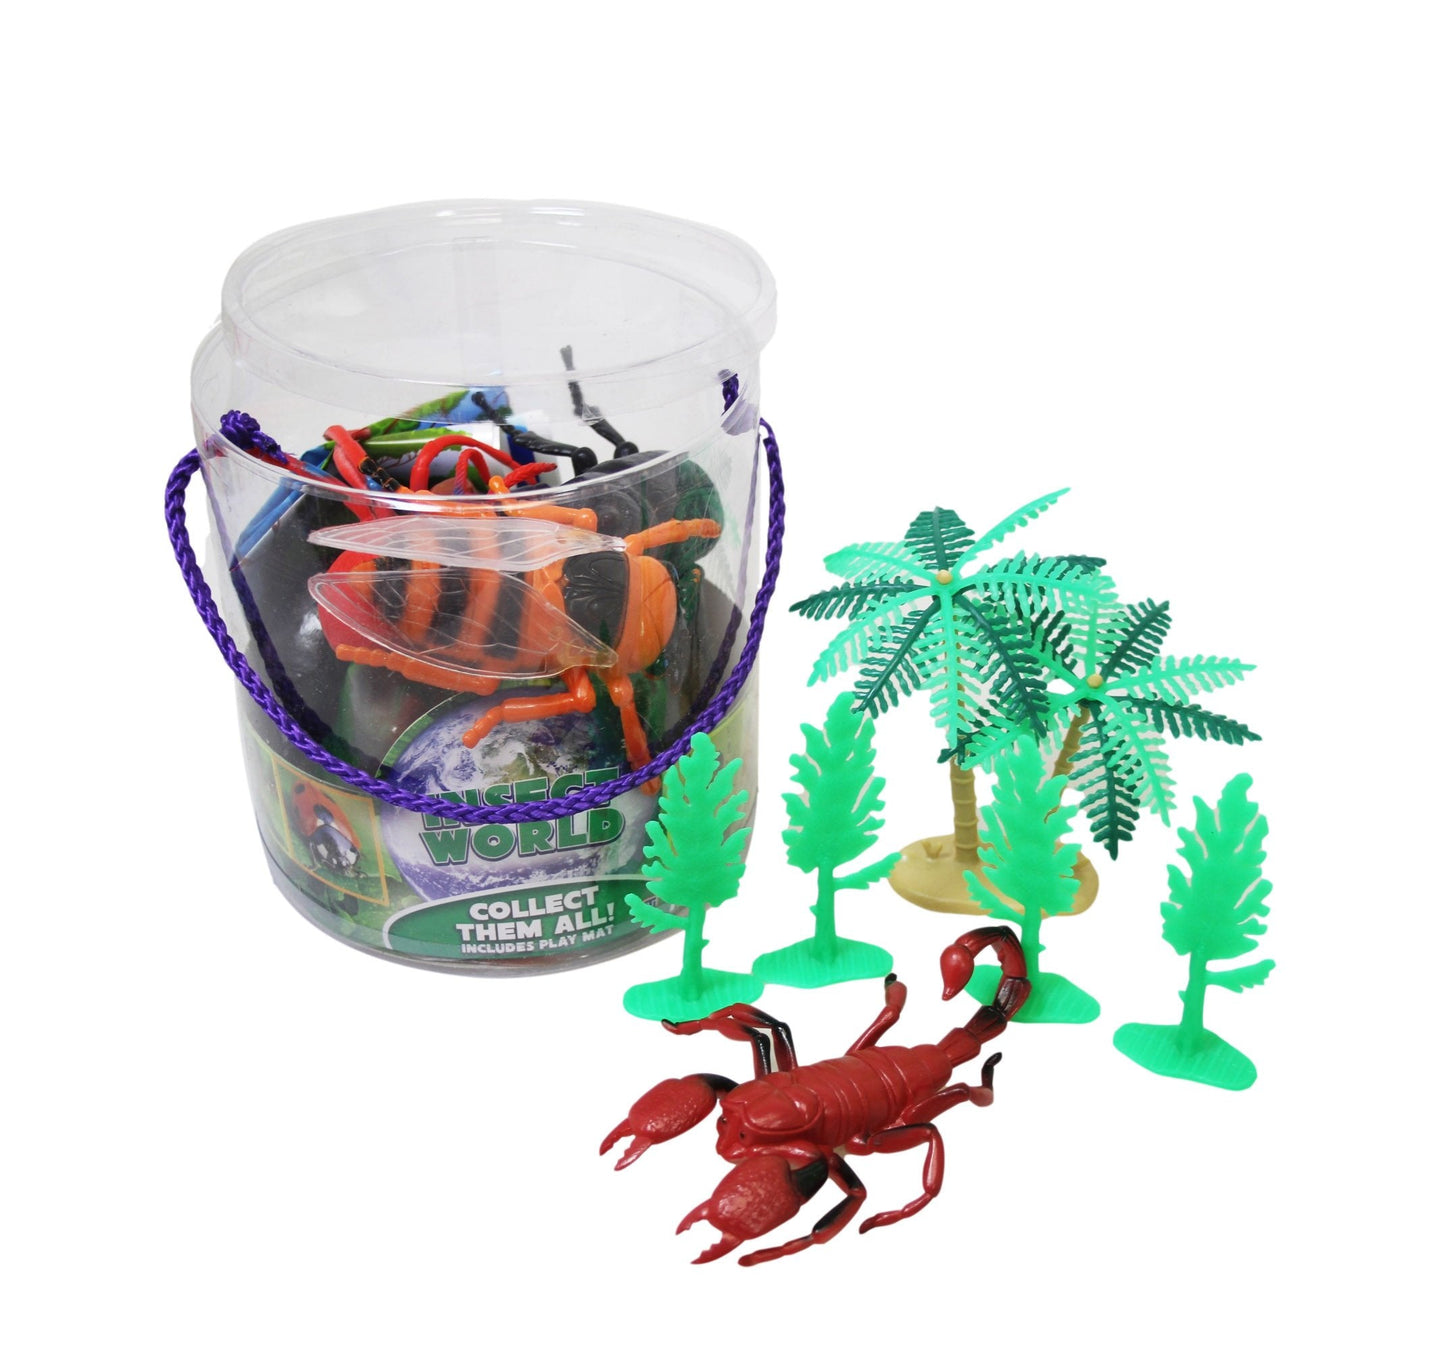 Childrens Fun Playing Toy Insect World Collections Include Play Mat 1374216 (Parcel Rate)